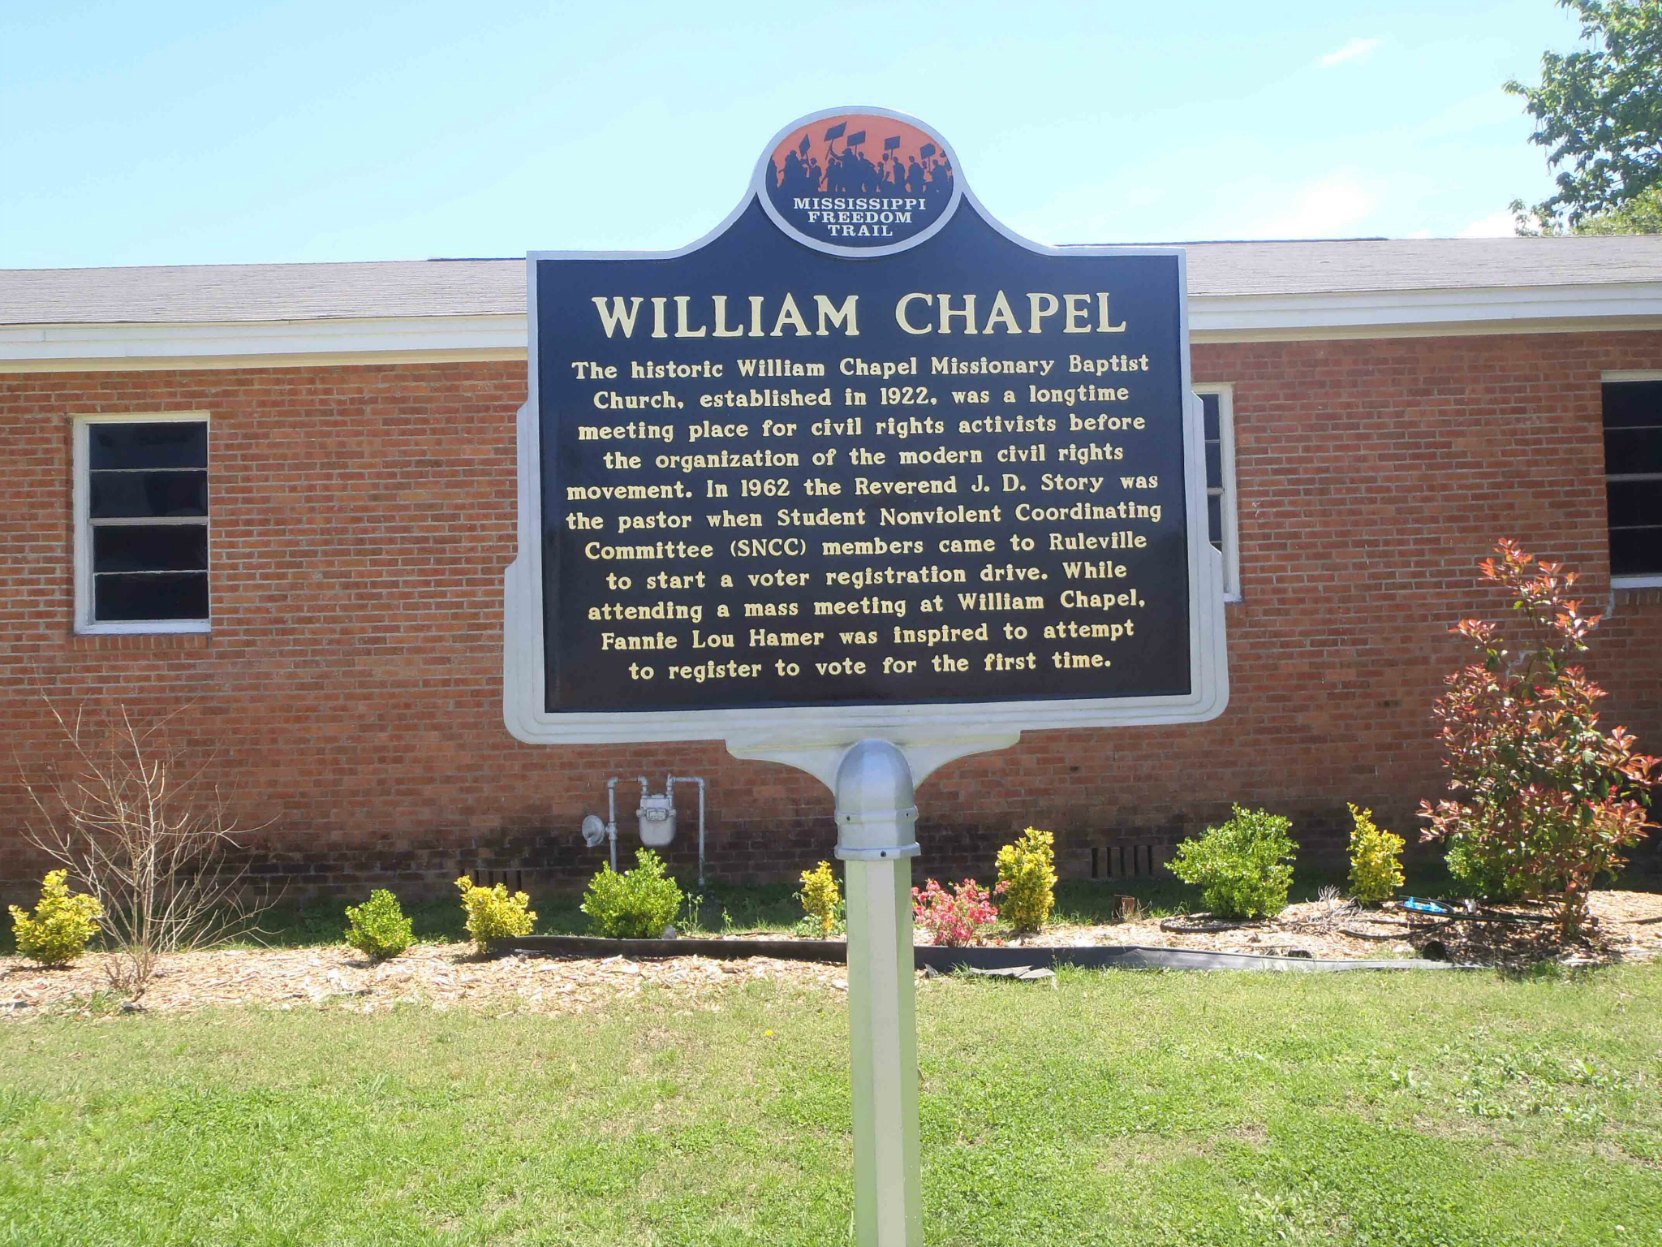 Mississippi Freedom Trail marker for William Chapel Missionary Baptist Church, Ruleville, Mississippi.